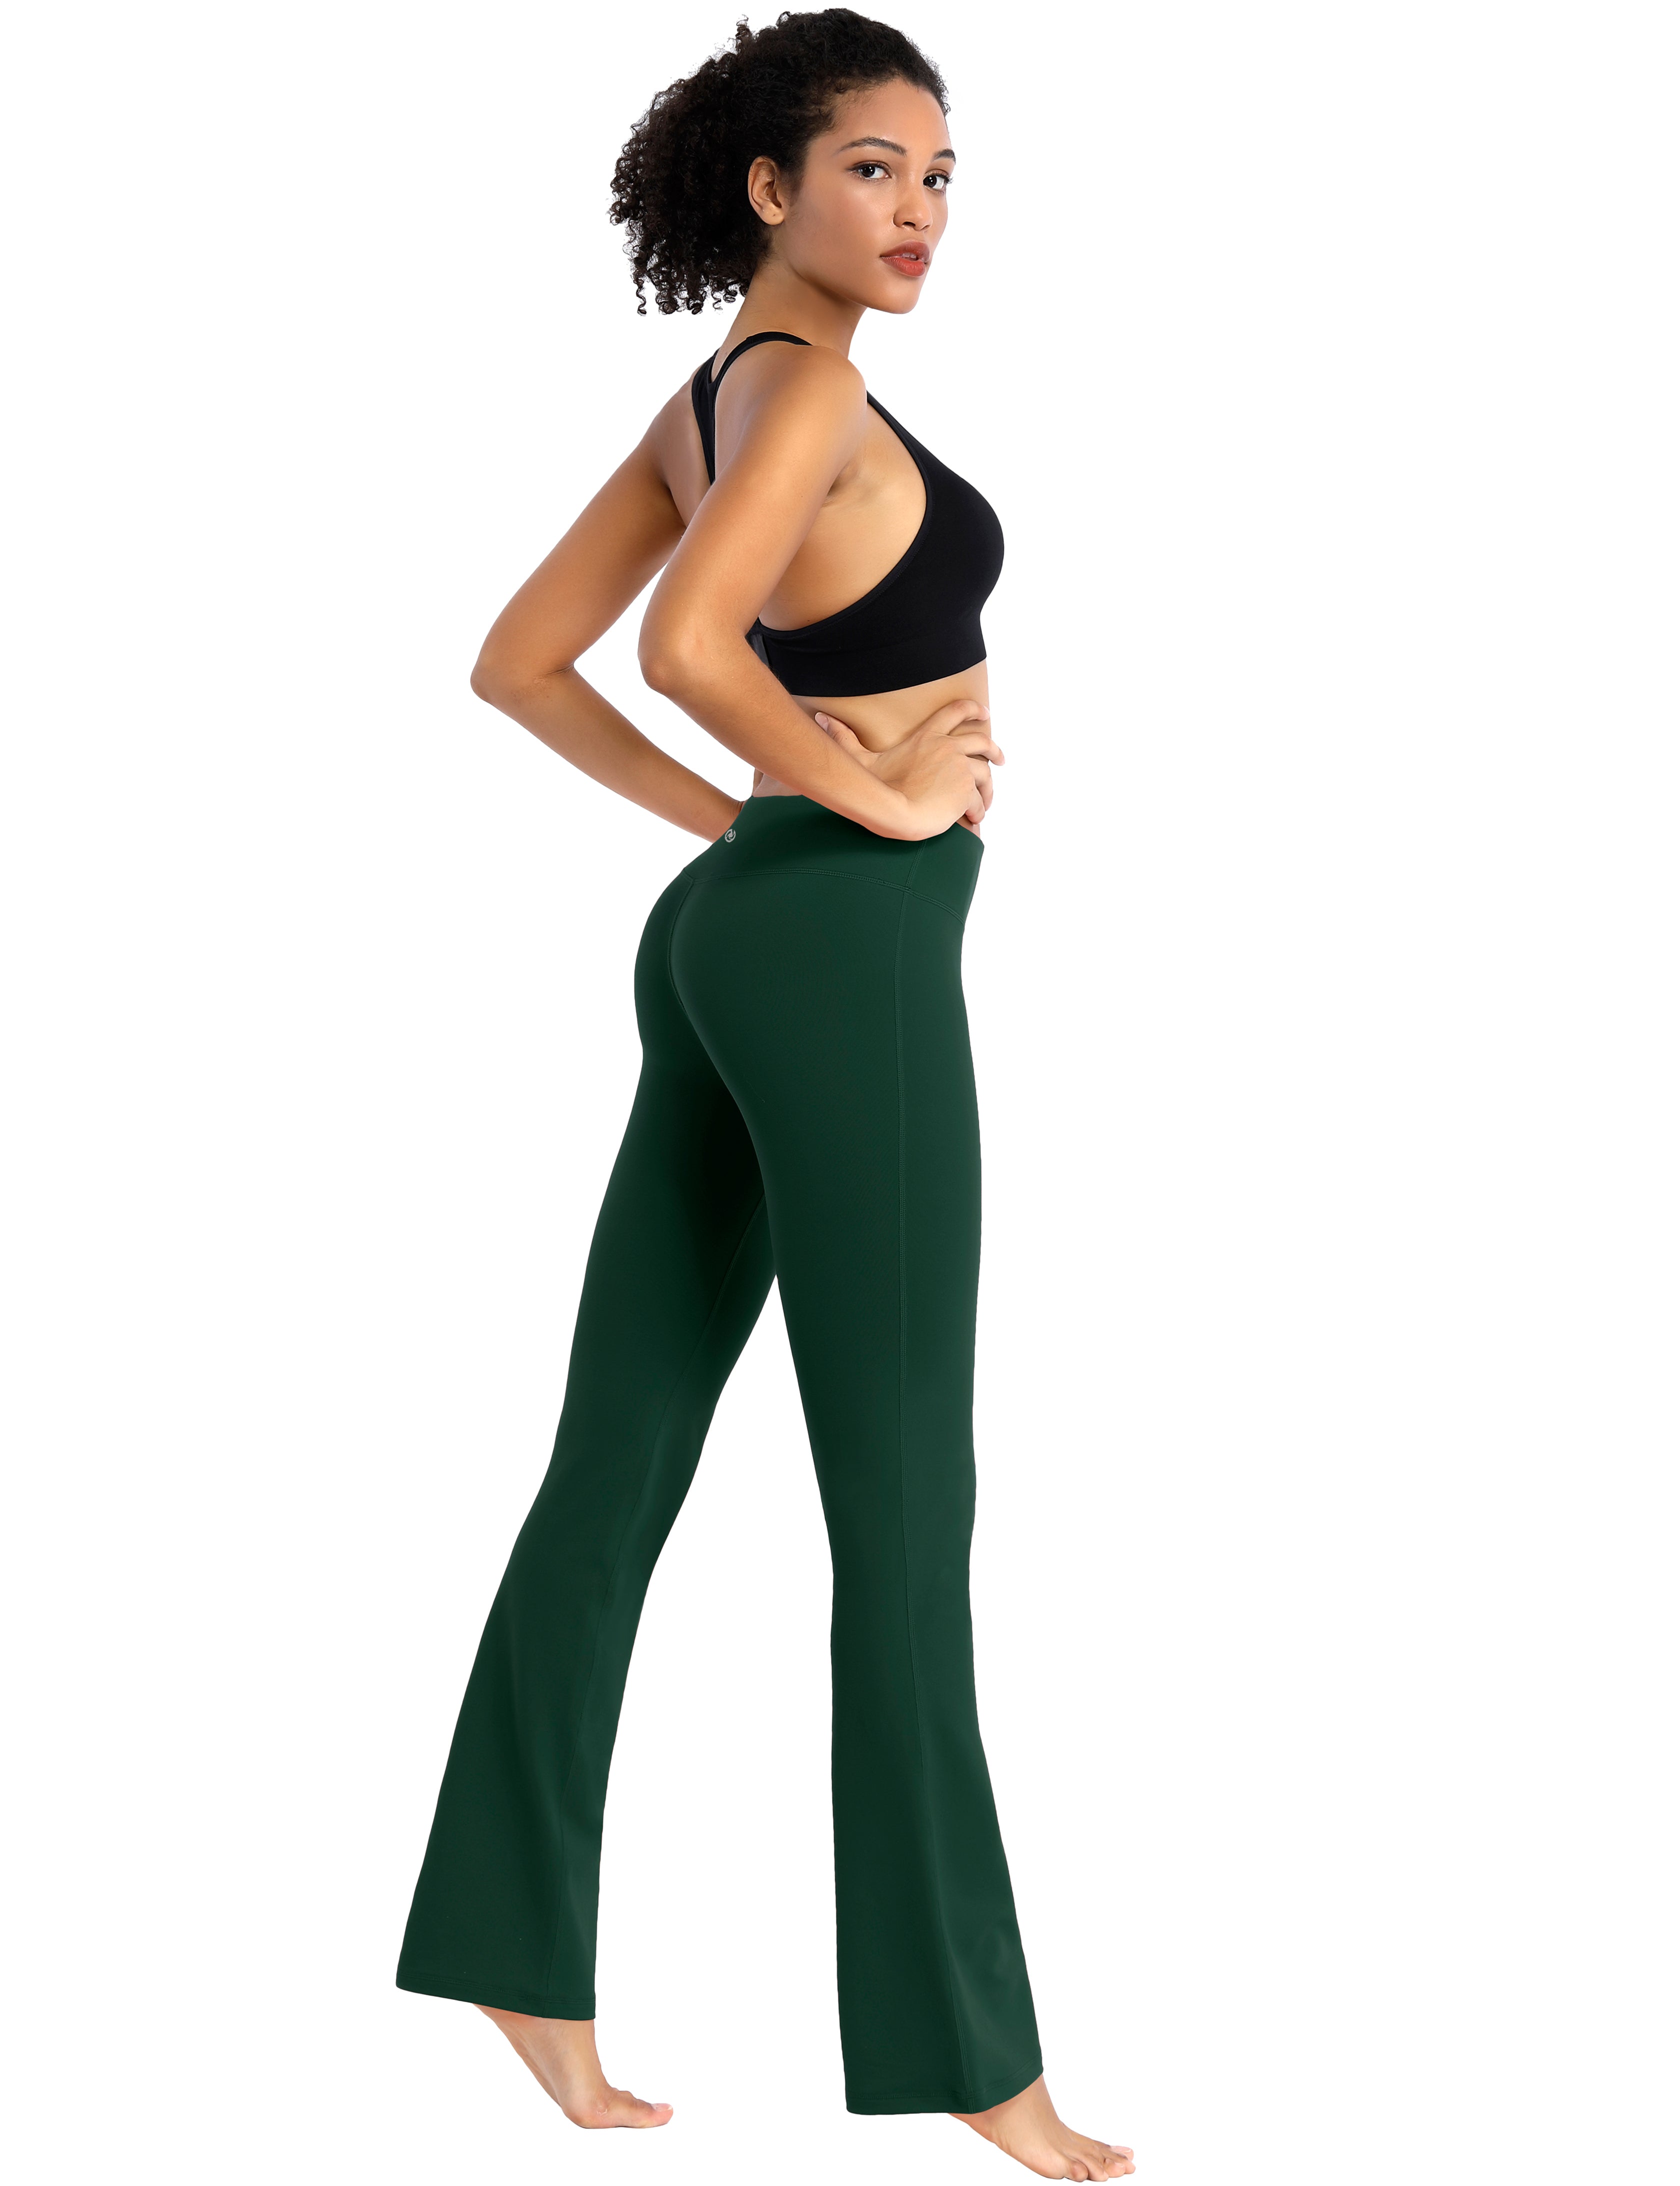 Cotton Nylon Bootcut Leggings olivegreen 87%Nylon/13%Spandex (Super soft, cotton feel , 280gsm) Fabric doesn't attract lint easily 4-way stretch No see-through Moisture-wicking Inner pocket Four lengths